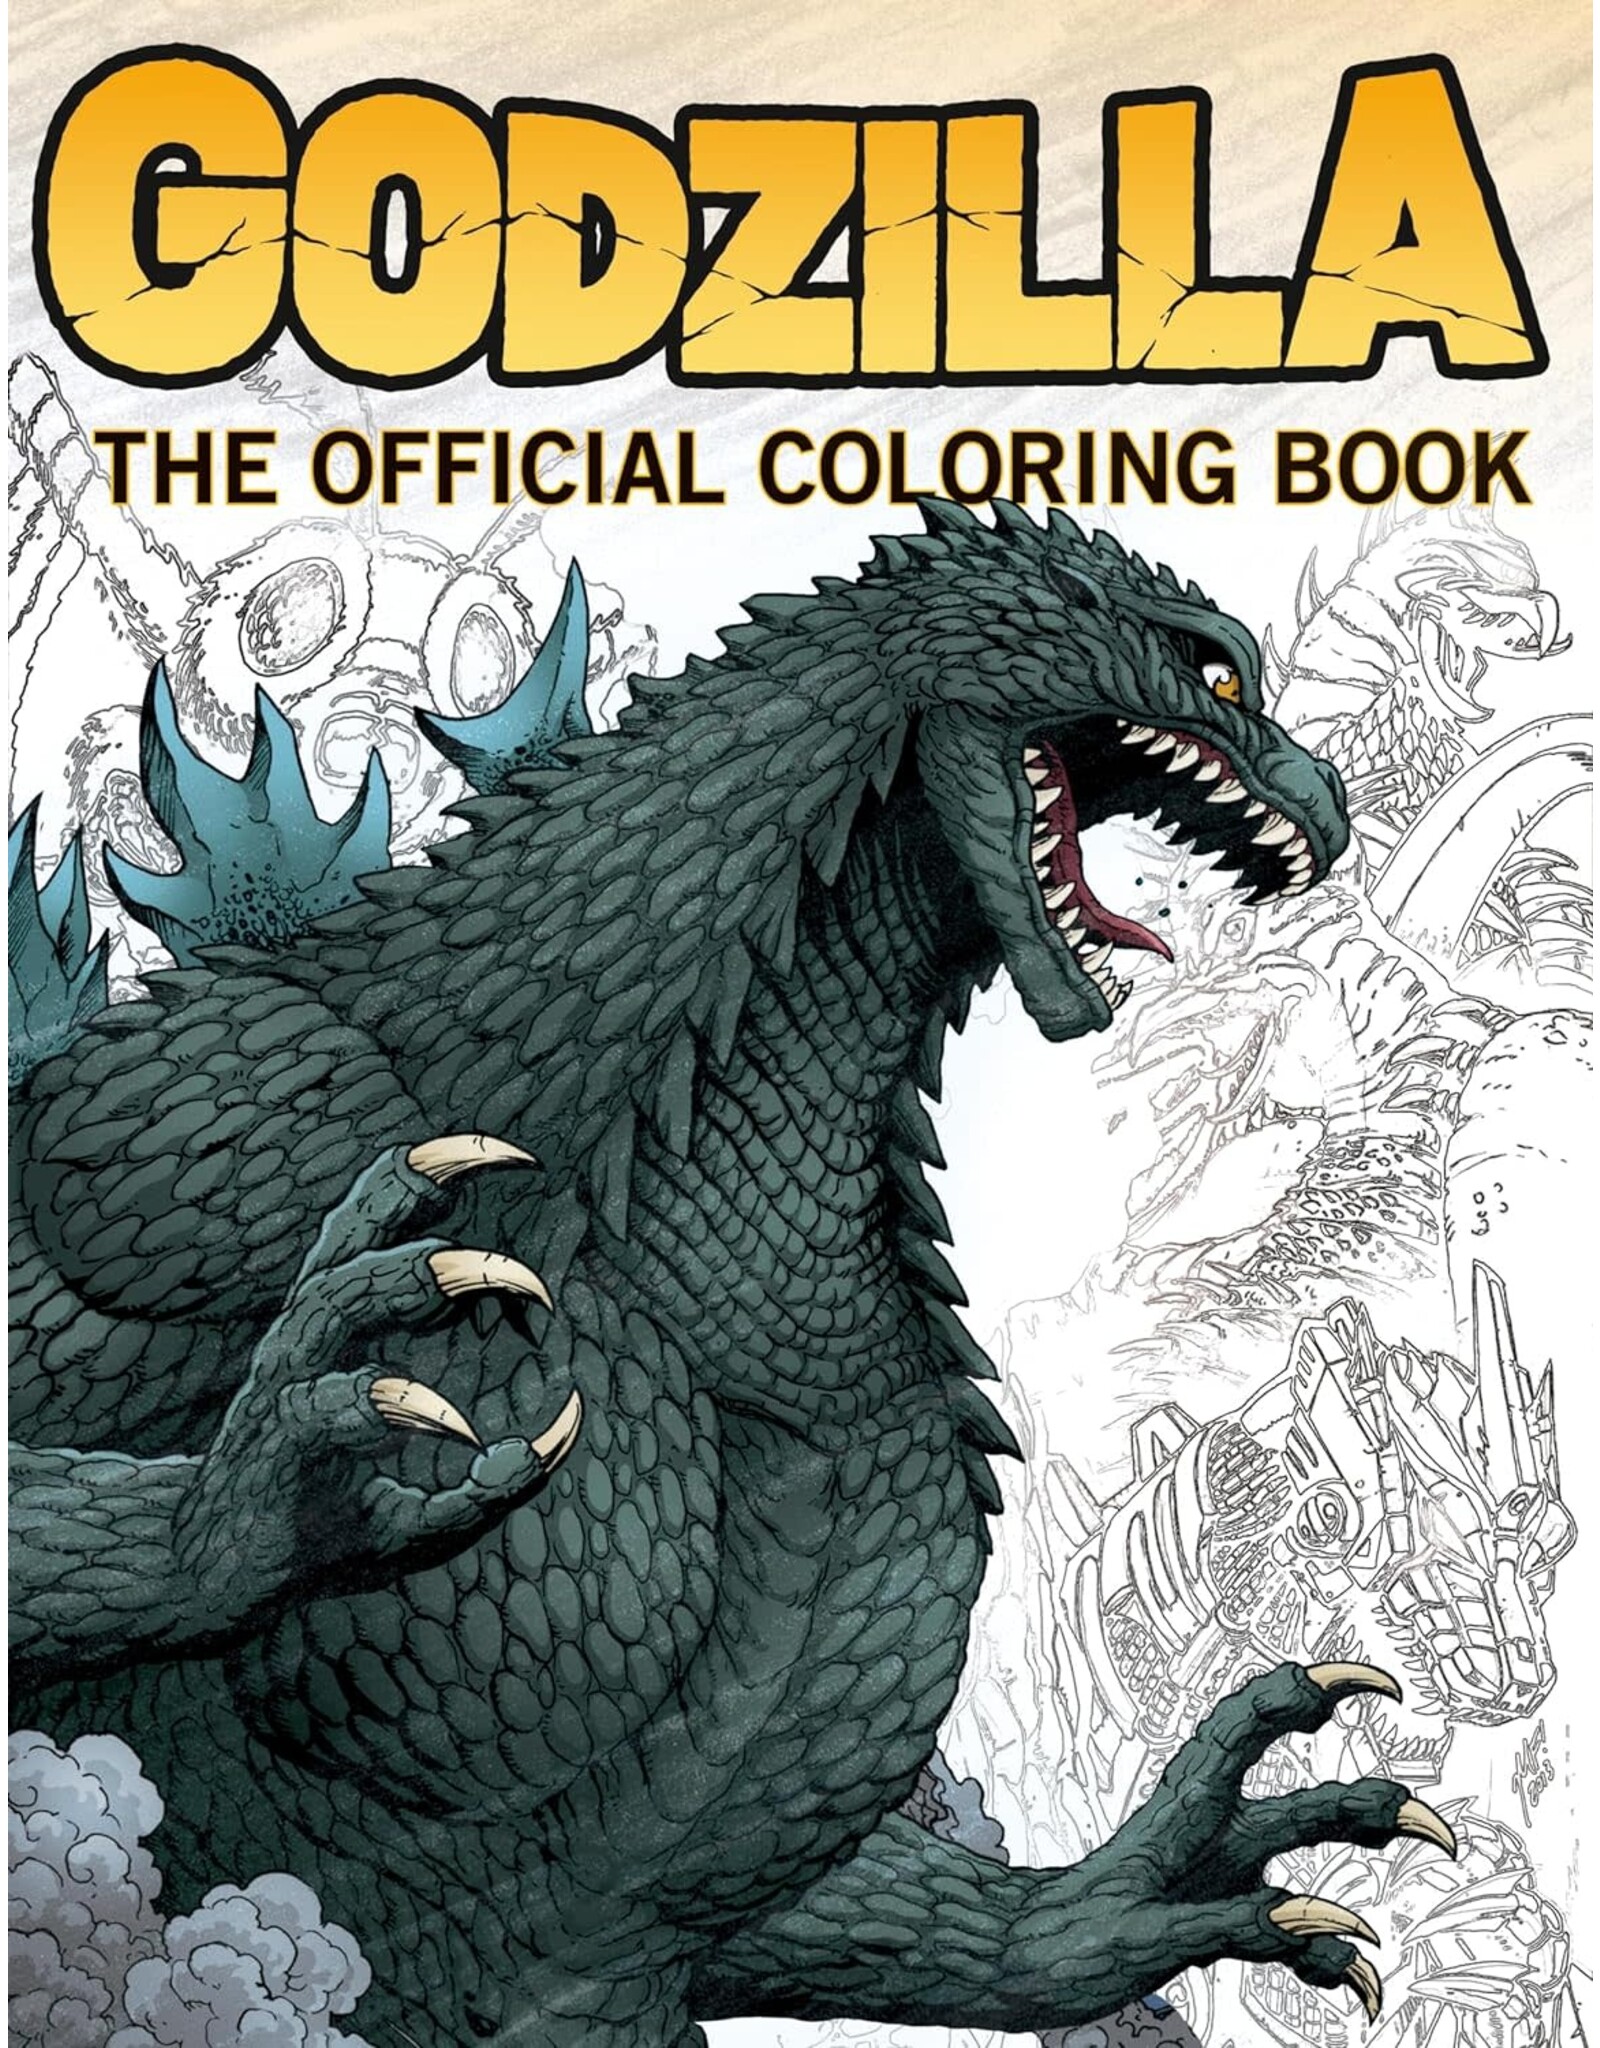 Godzilla - The Official Coloring Book